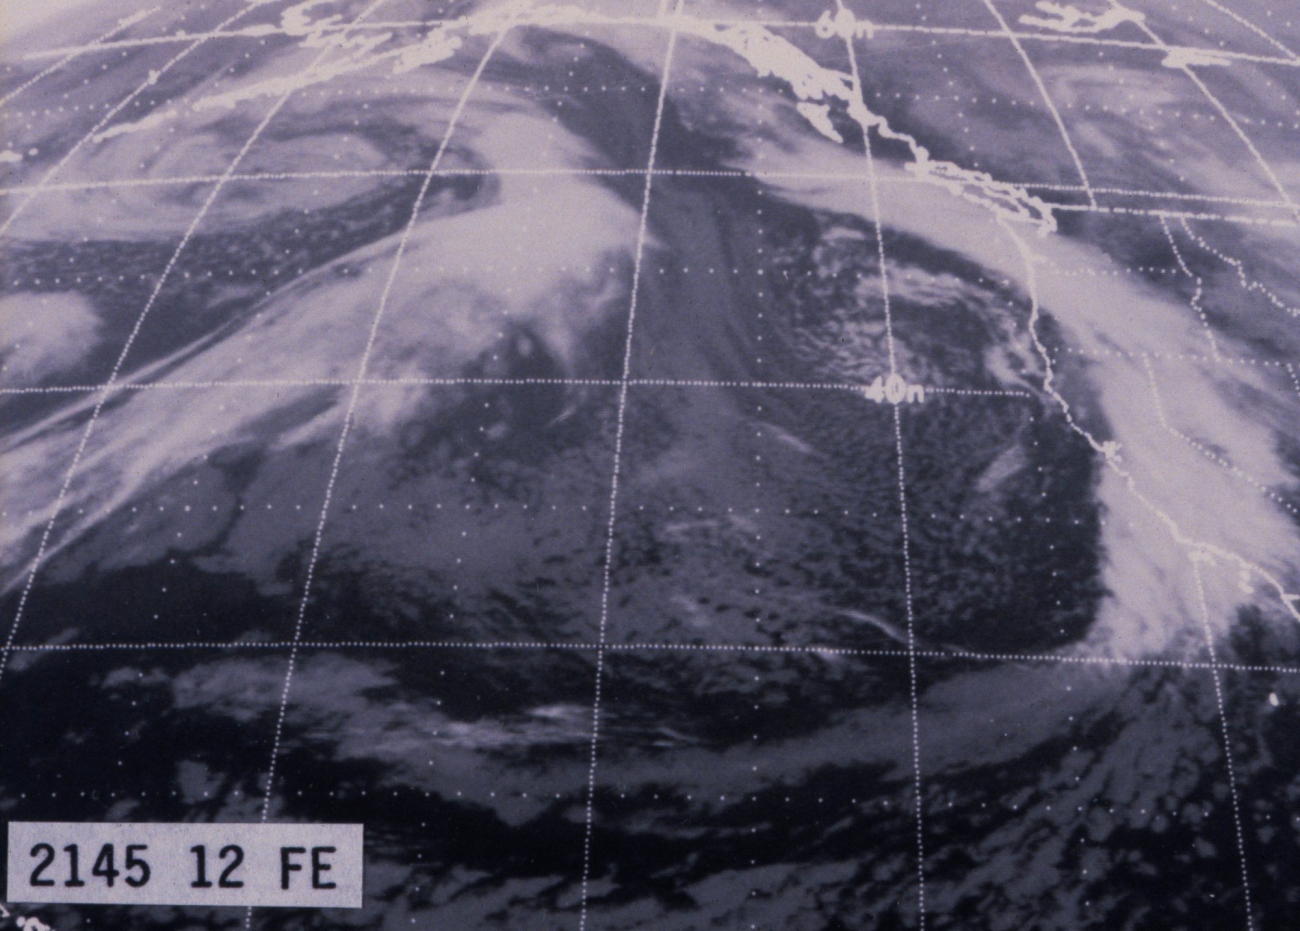 Two large storms in the northeast Pacific Ocean